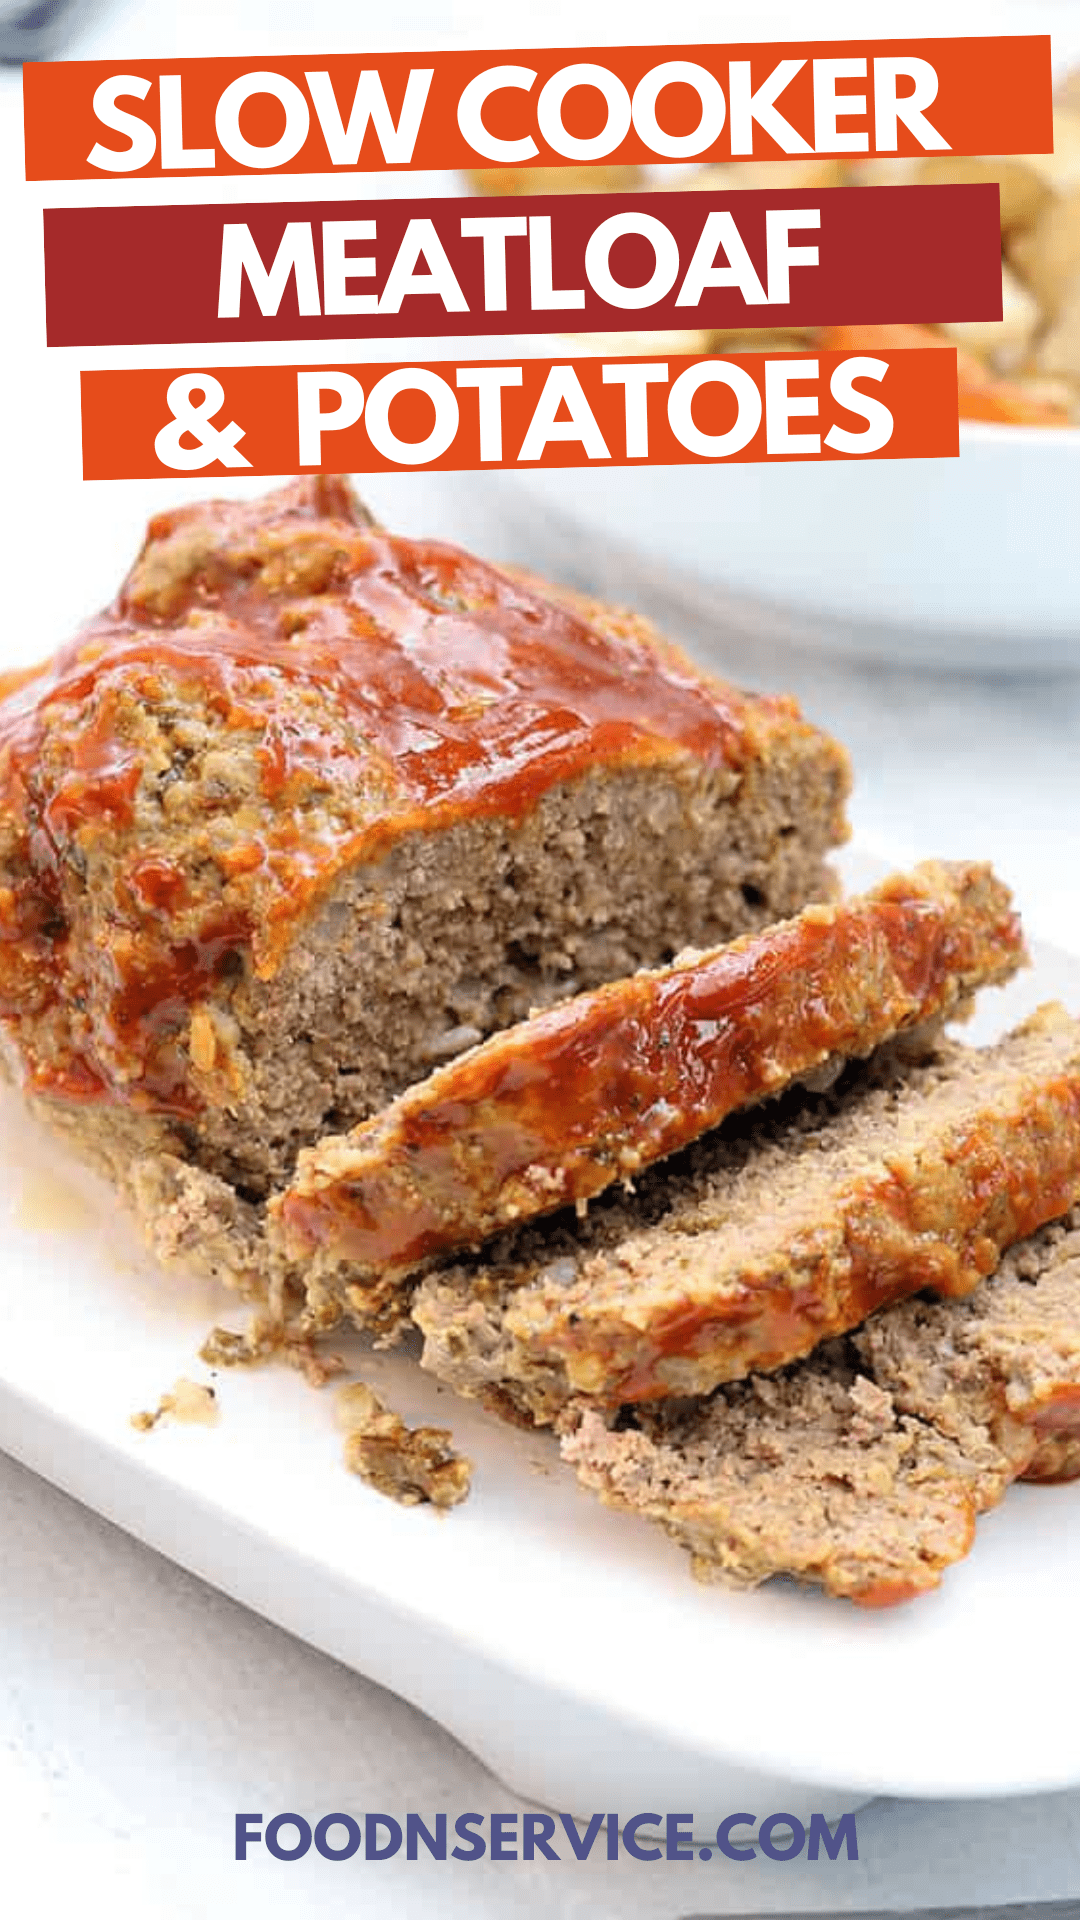 Slow Cooker Meatloaf and Potatoes